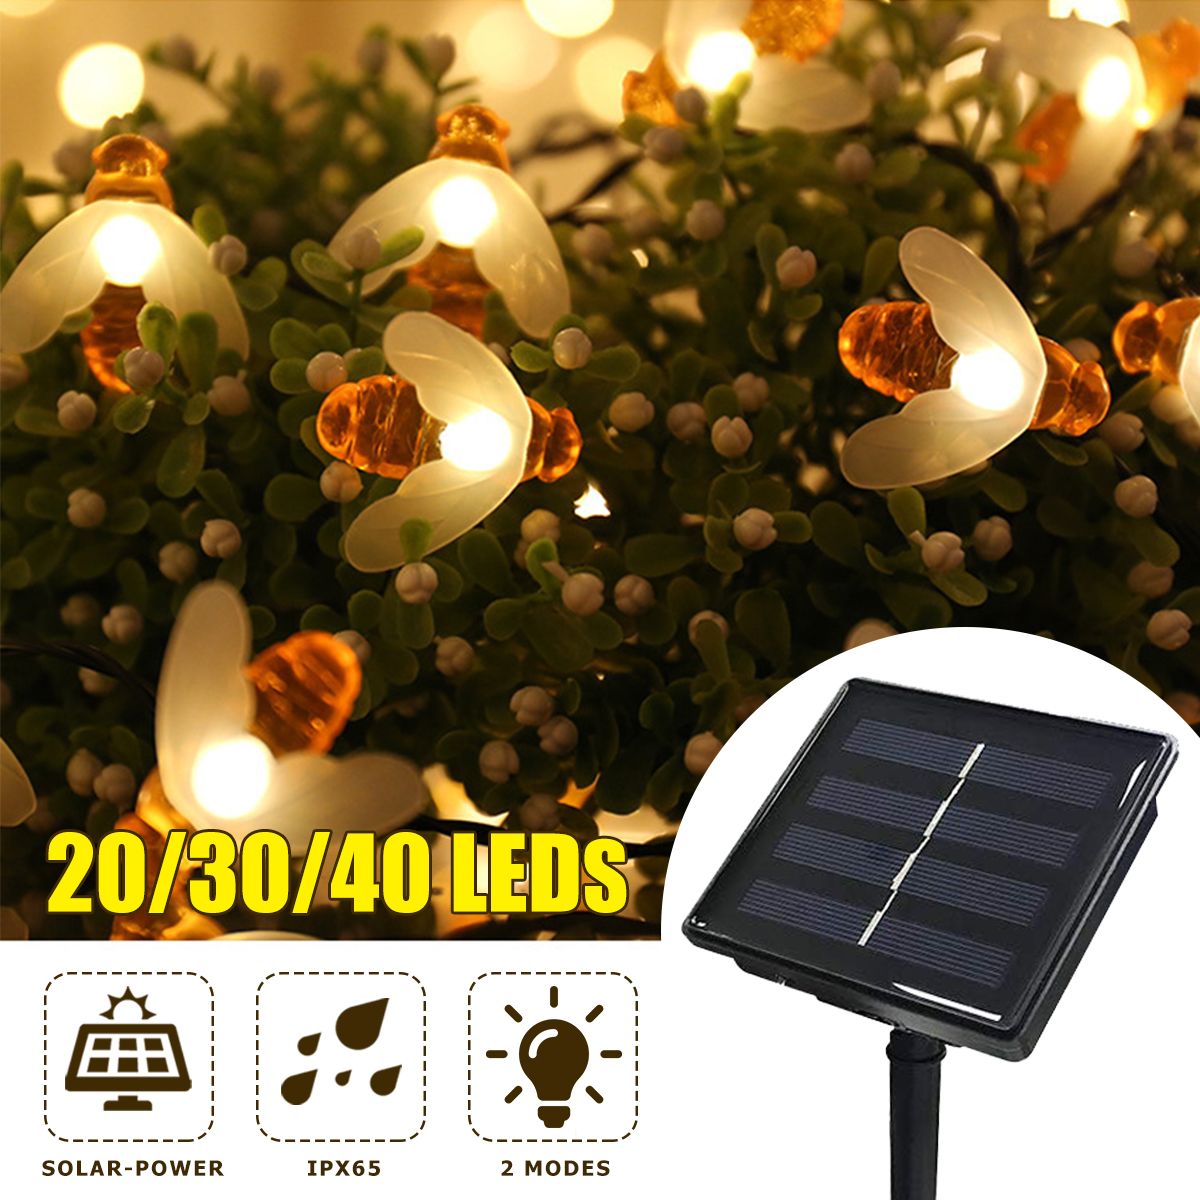 485m-635m-785m-Solar-Powered-LED-String-Light-Waterproof-Bee-Outdoor-Garden-Lamp-for-Gift-Decor-Part-1647998